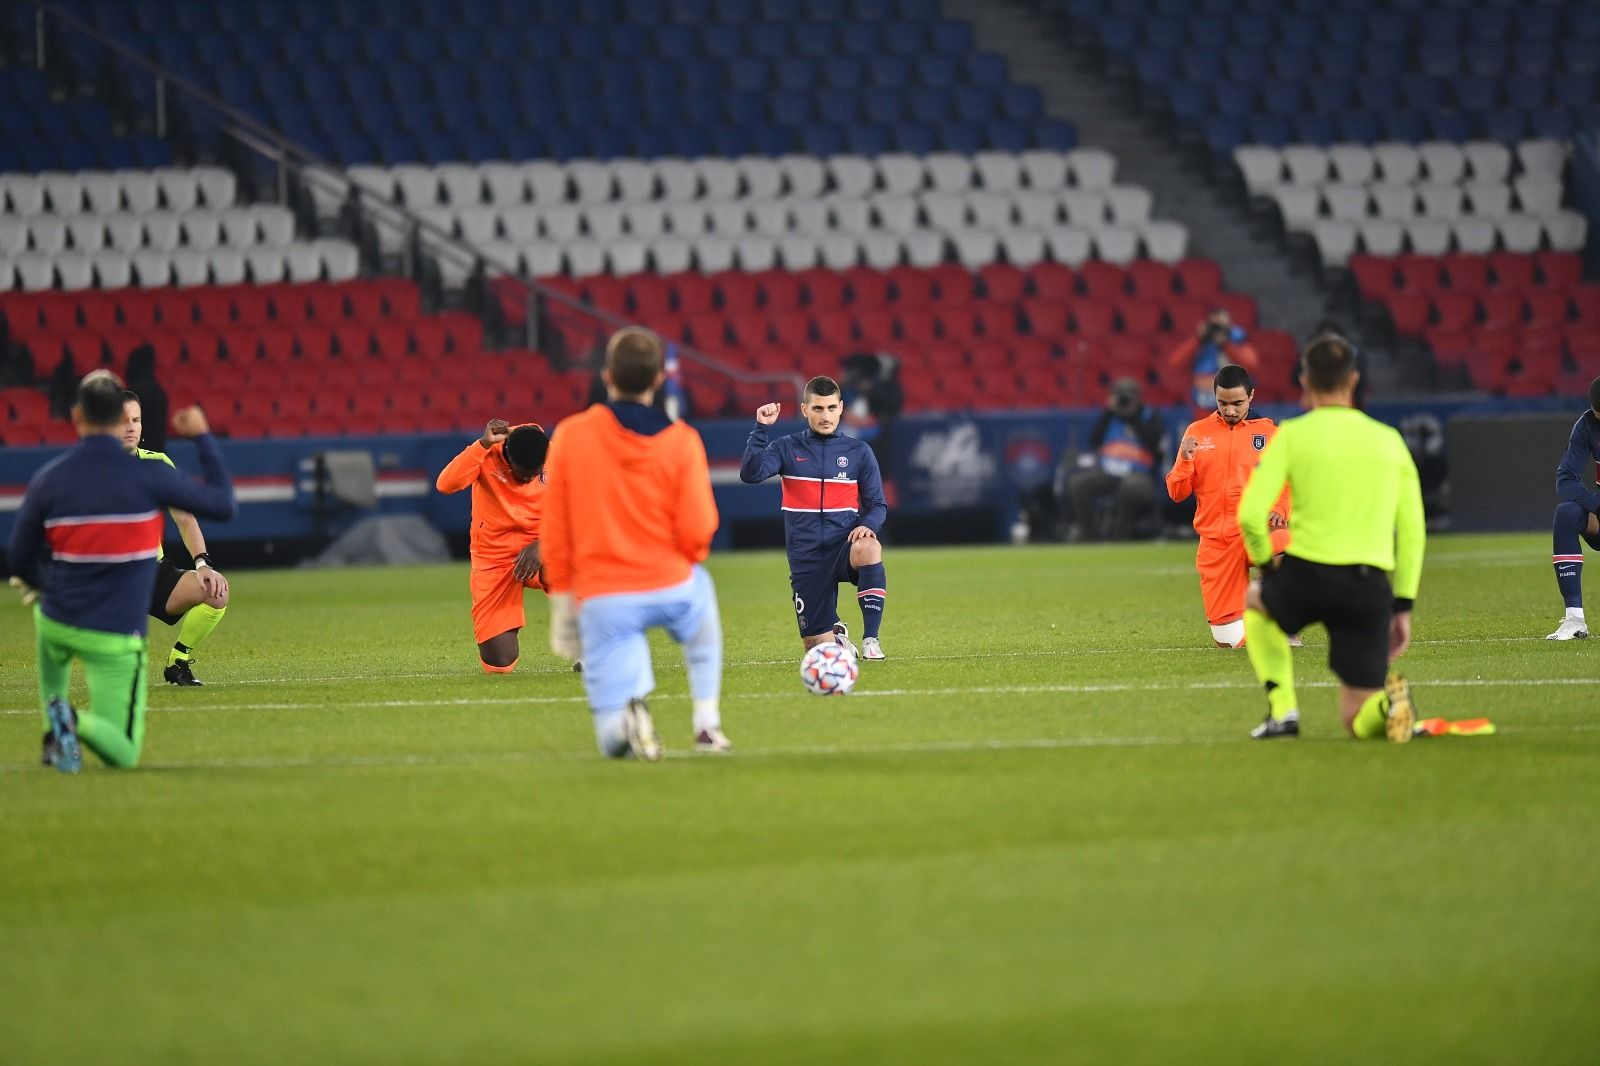 PSG, Basaksehir players take knee before restarting suspended game after racism walkout